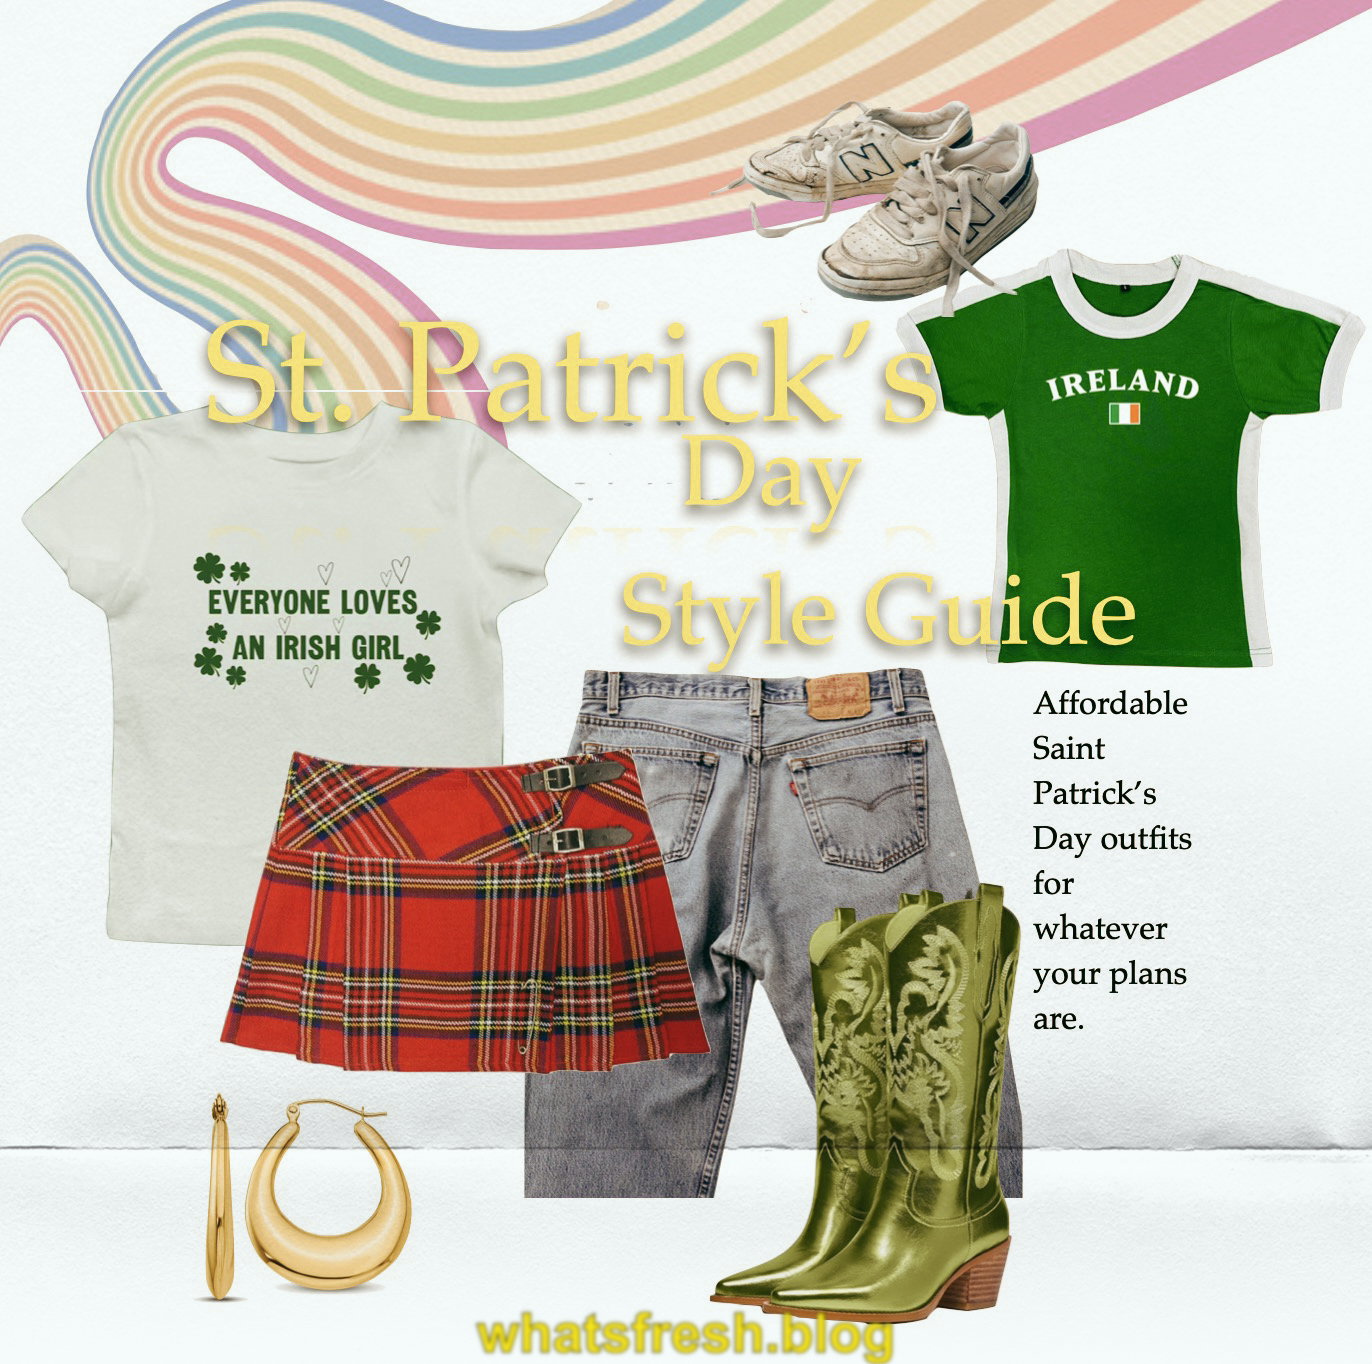 Saint Patrick’s Day Outfits for $150